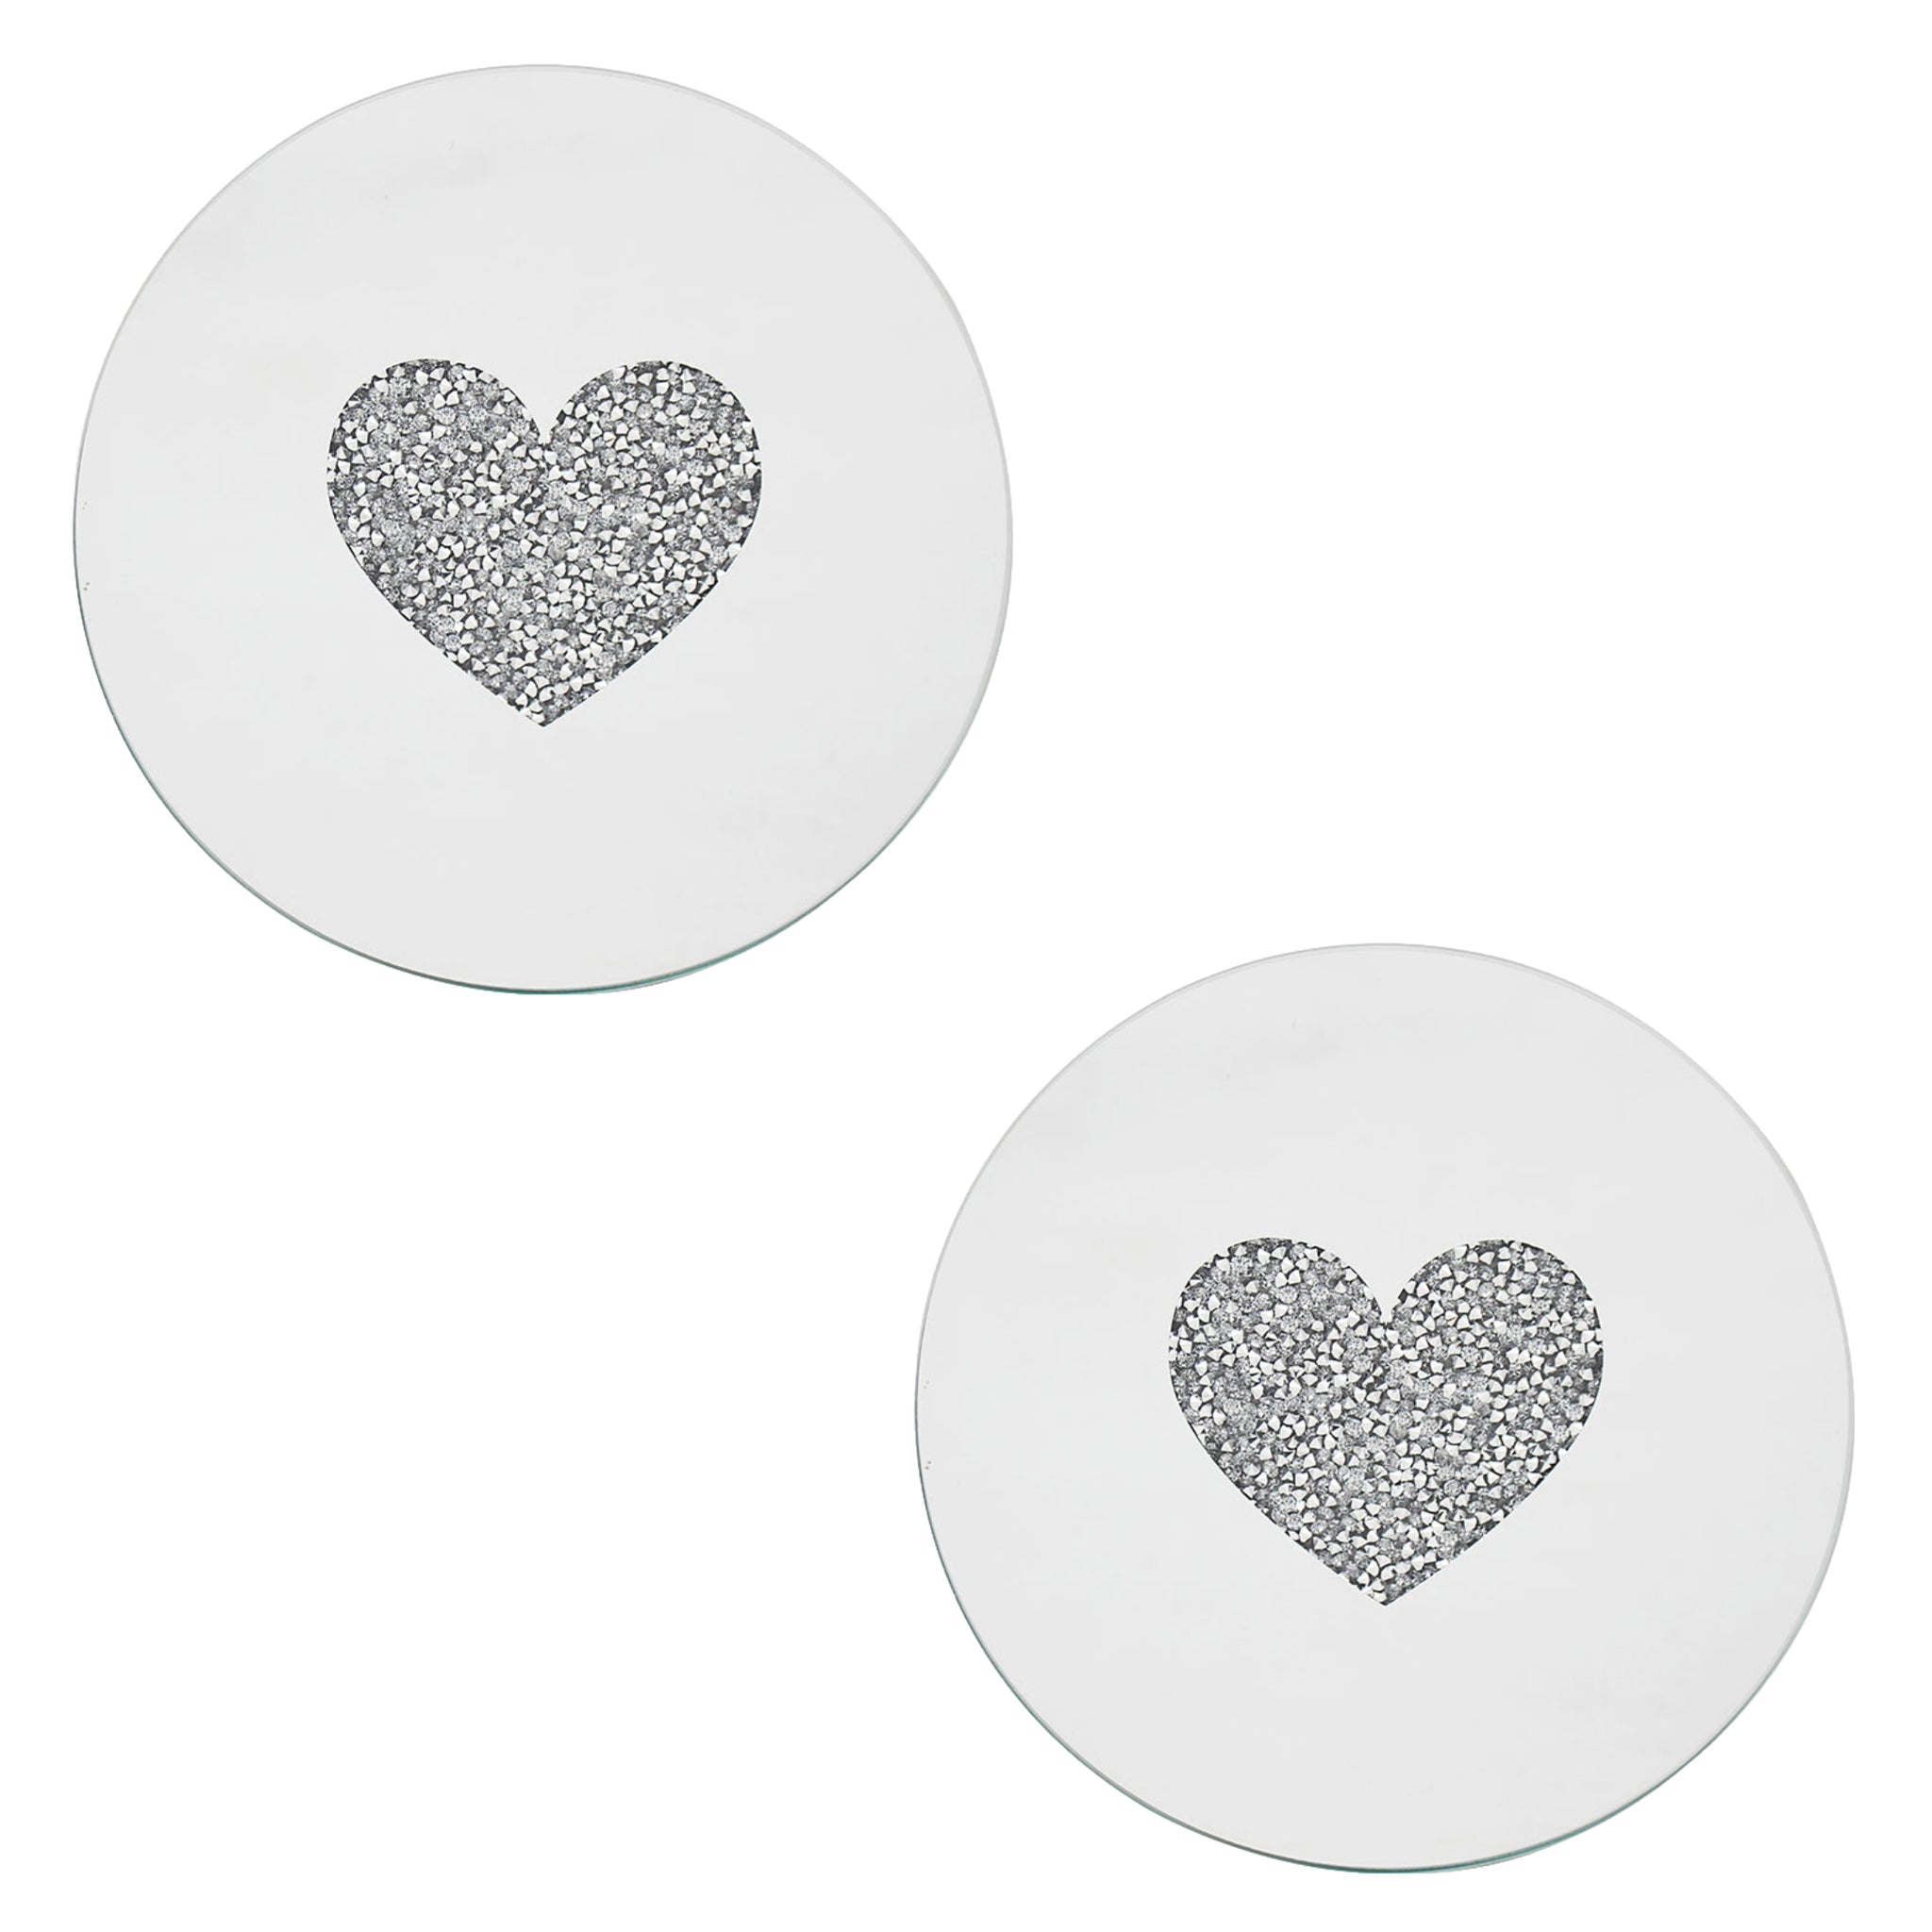 Set of 2 15cm Mirrored Round Candle Plate - Multi Crystal Heart Diamante